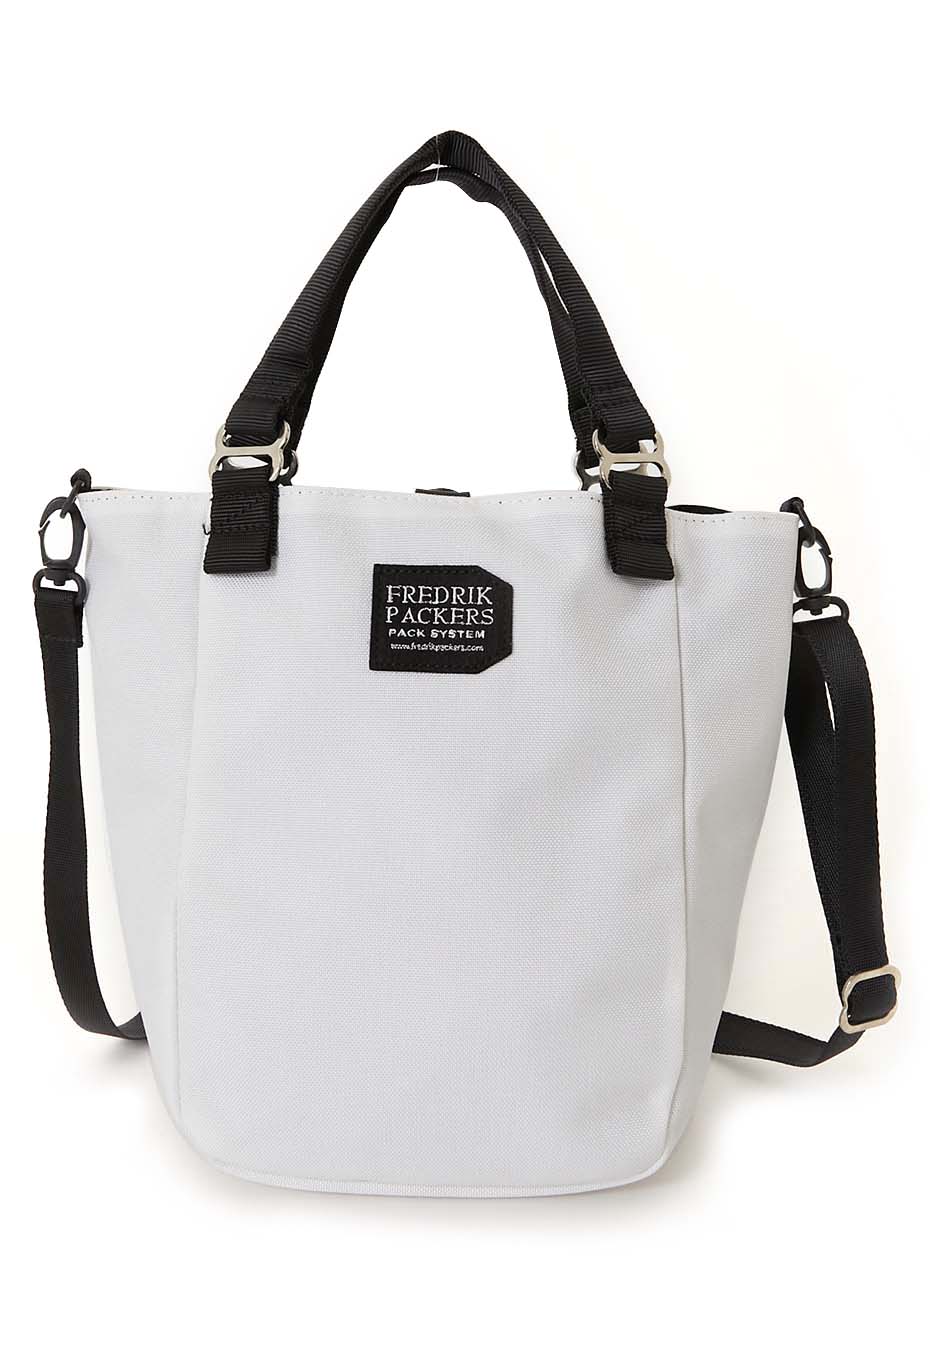 FREDRIK PACKERS 1000D Mission Tote Bag XS